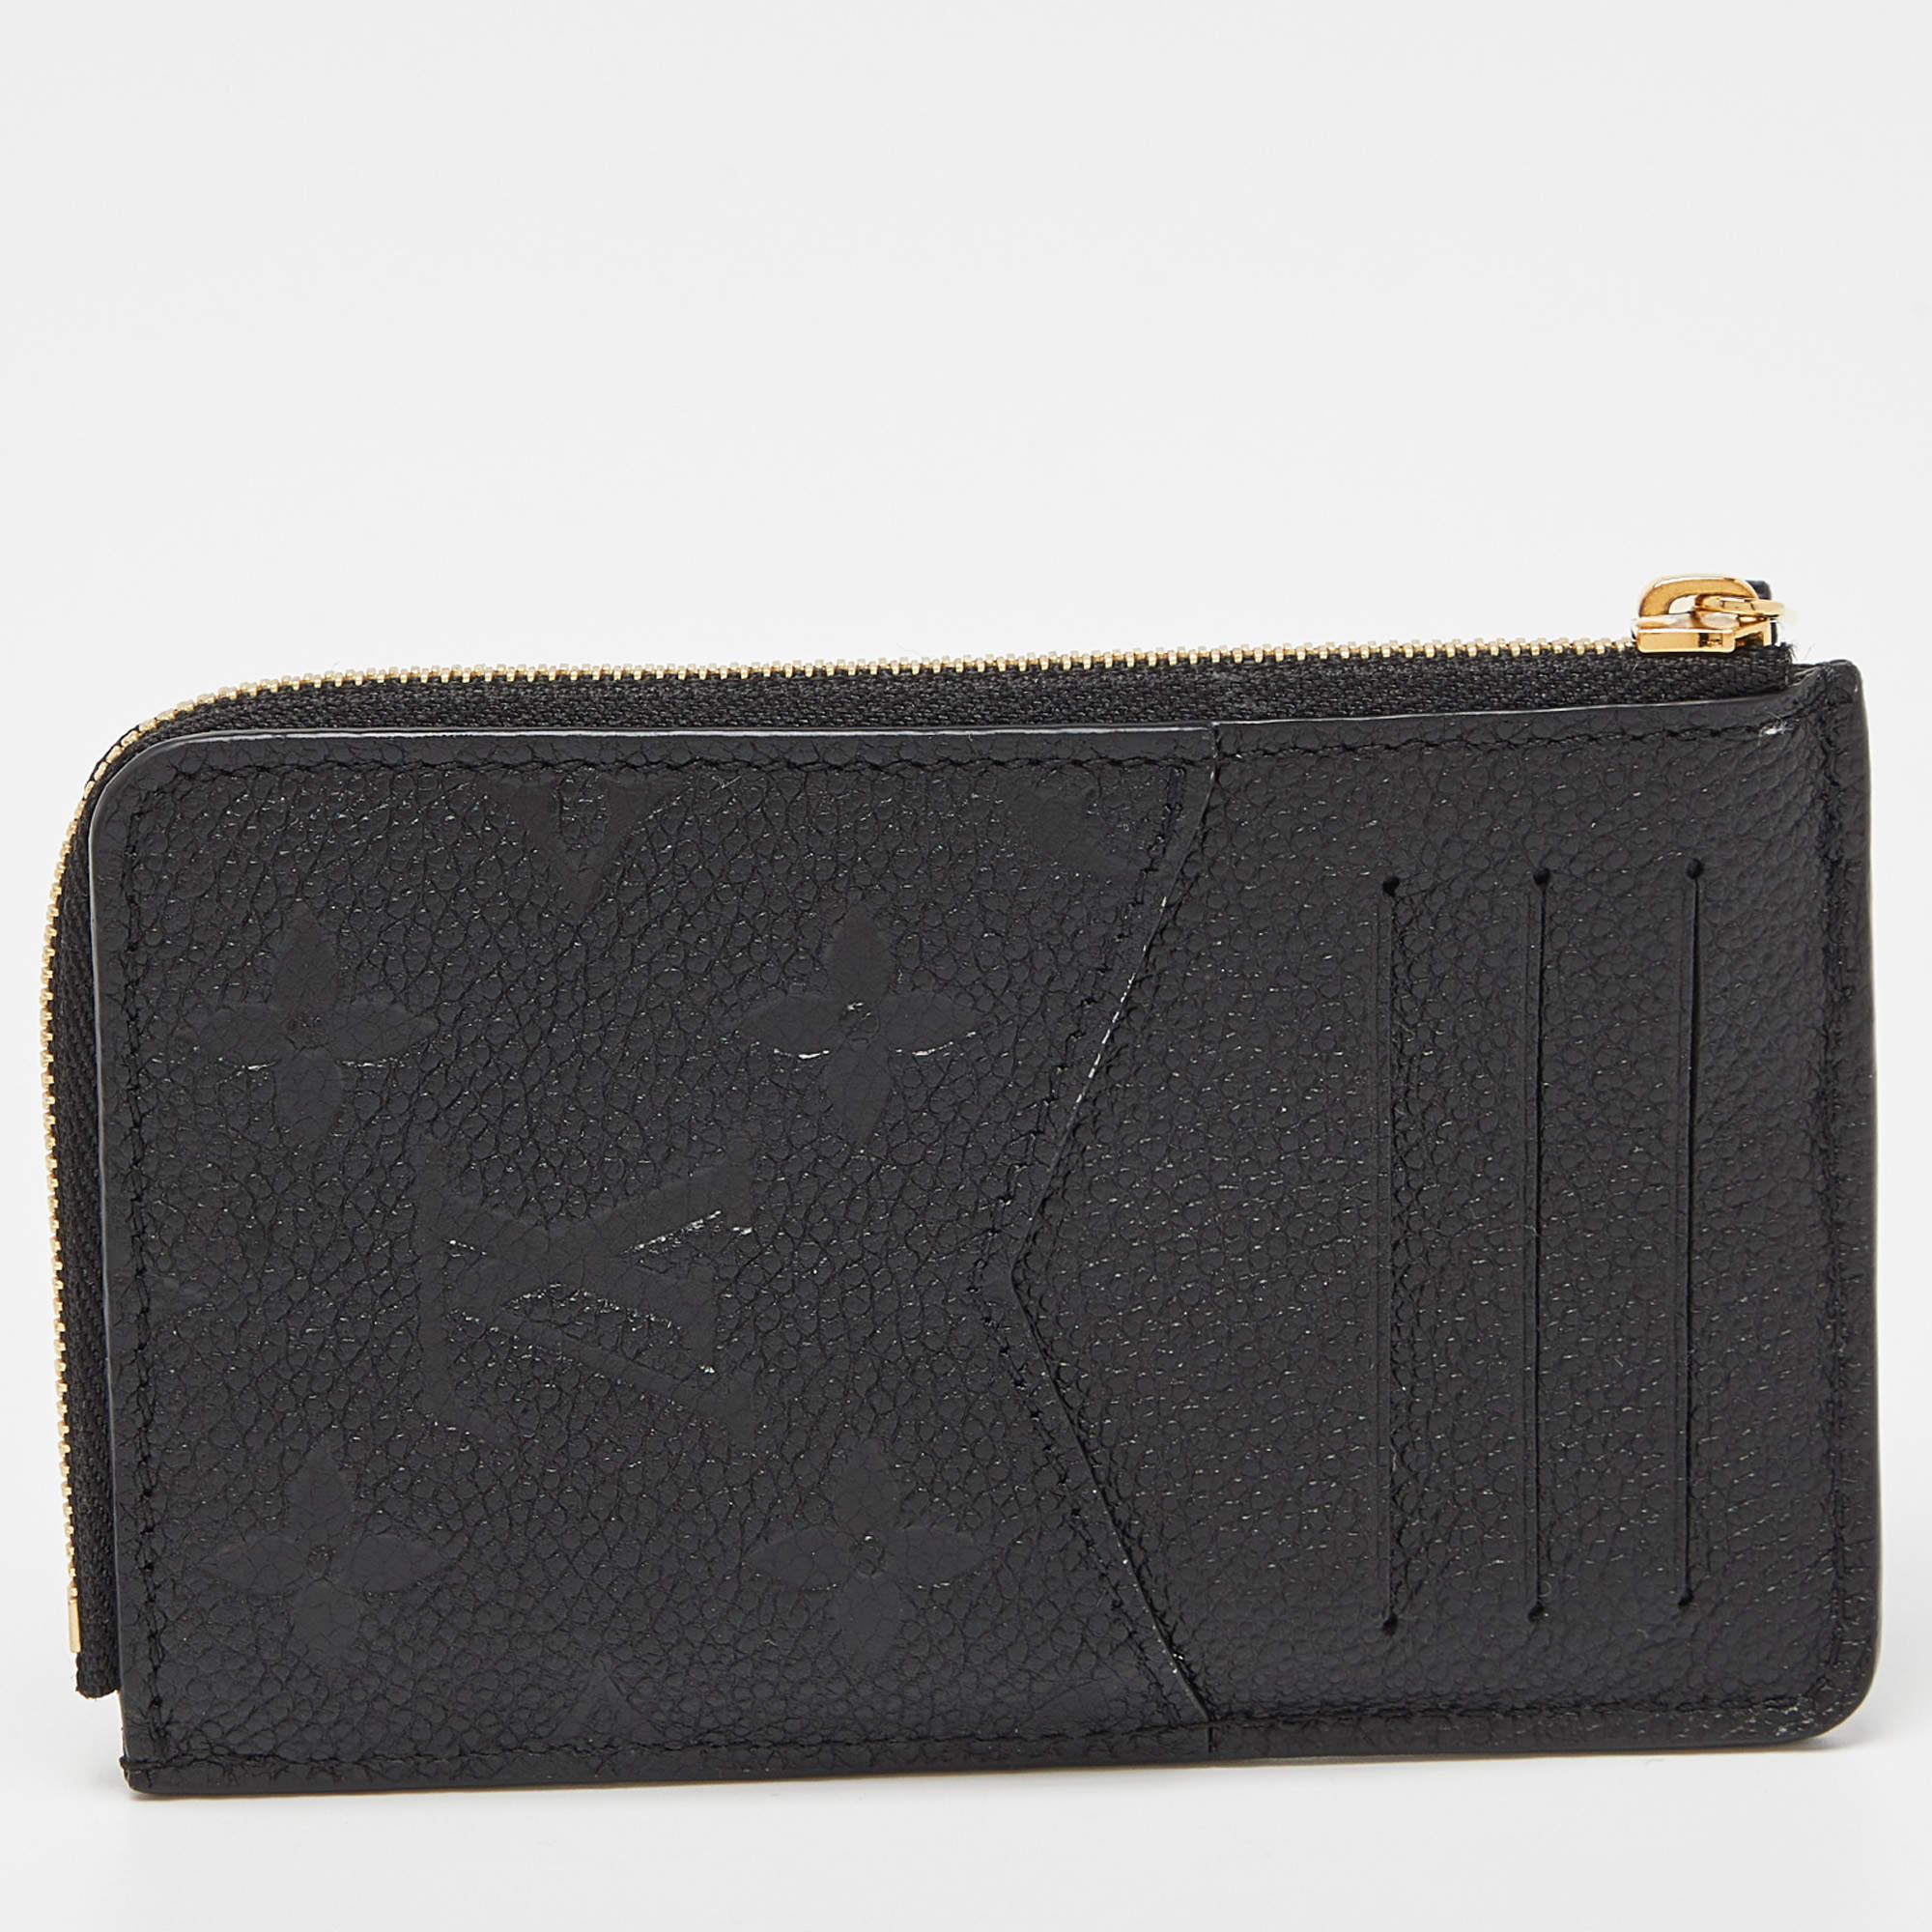 Designed by Louis Vuitton, this card holder made from Monogram Empreinte leather is the perfect accessory to keep your cards in proper order, as it features multiple slots. It easily fits coins too.

Includes: Original Dustbag, Original Box

